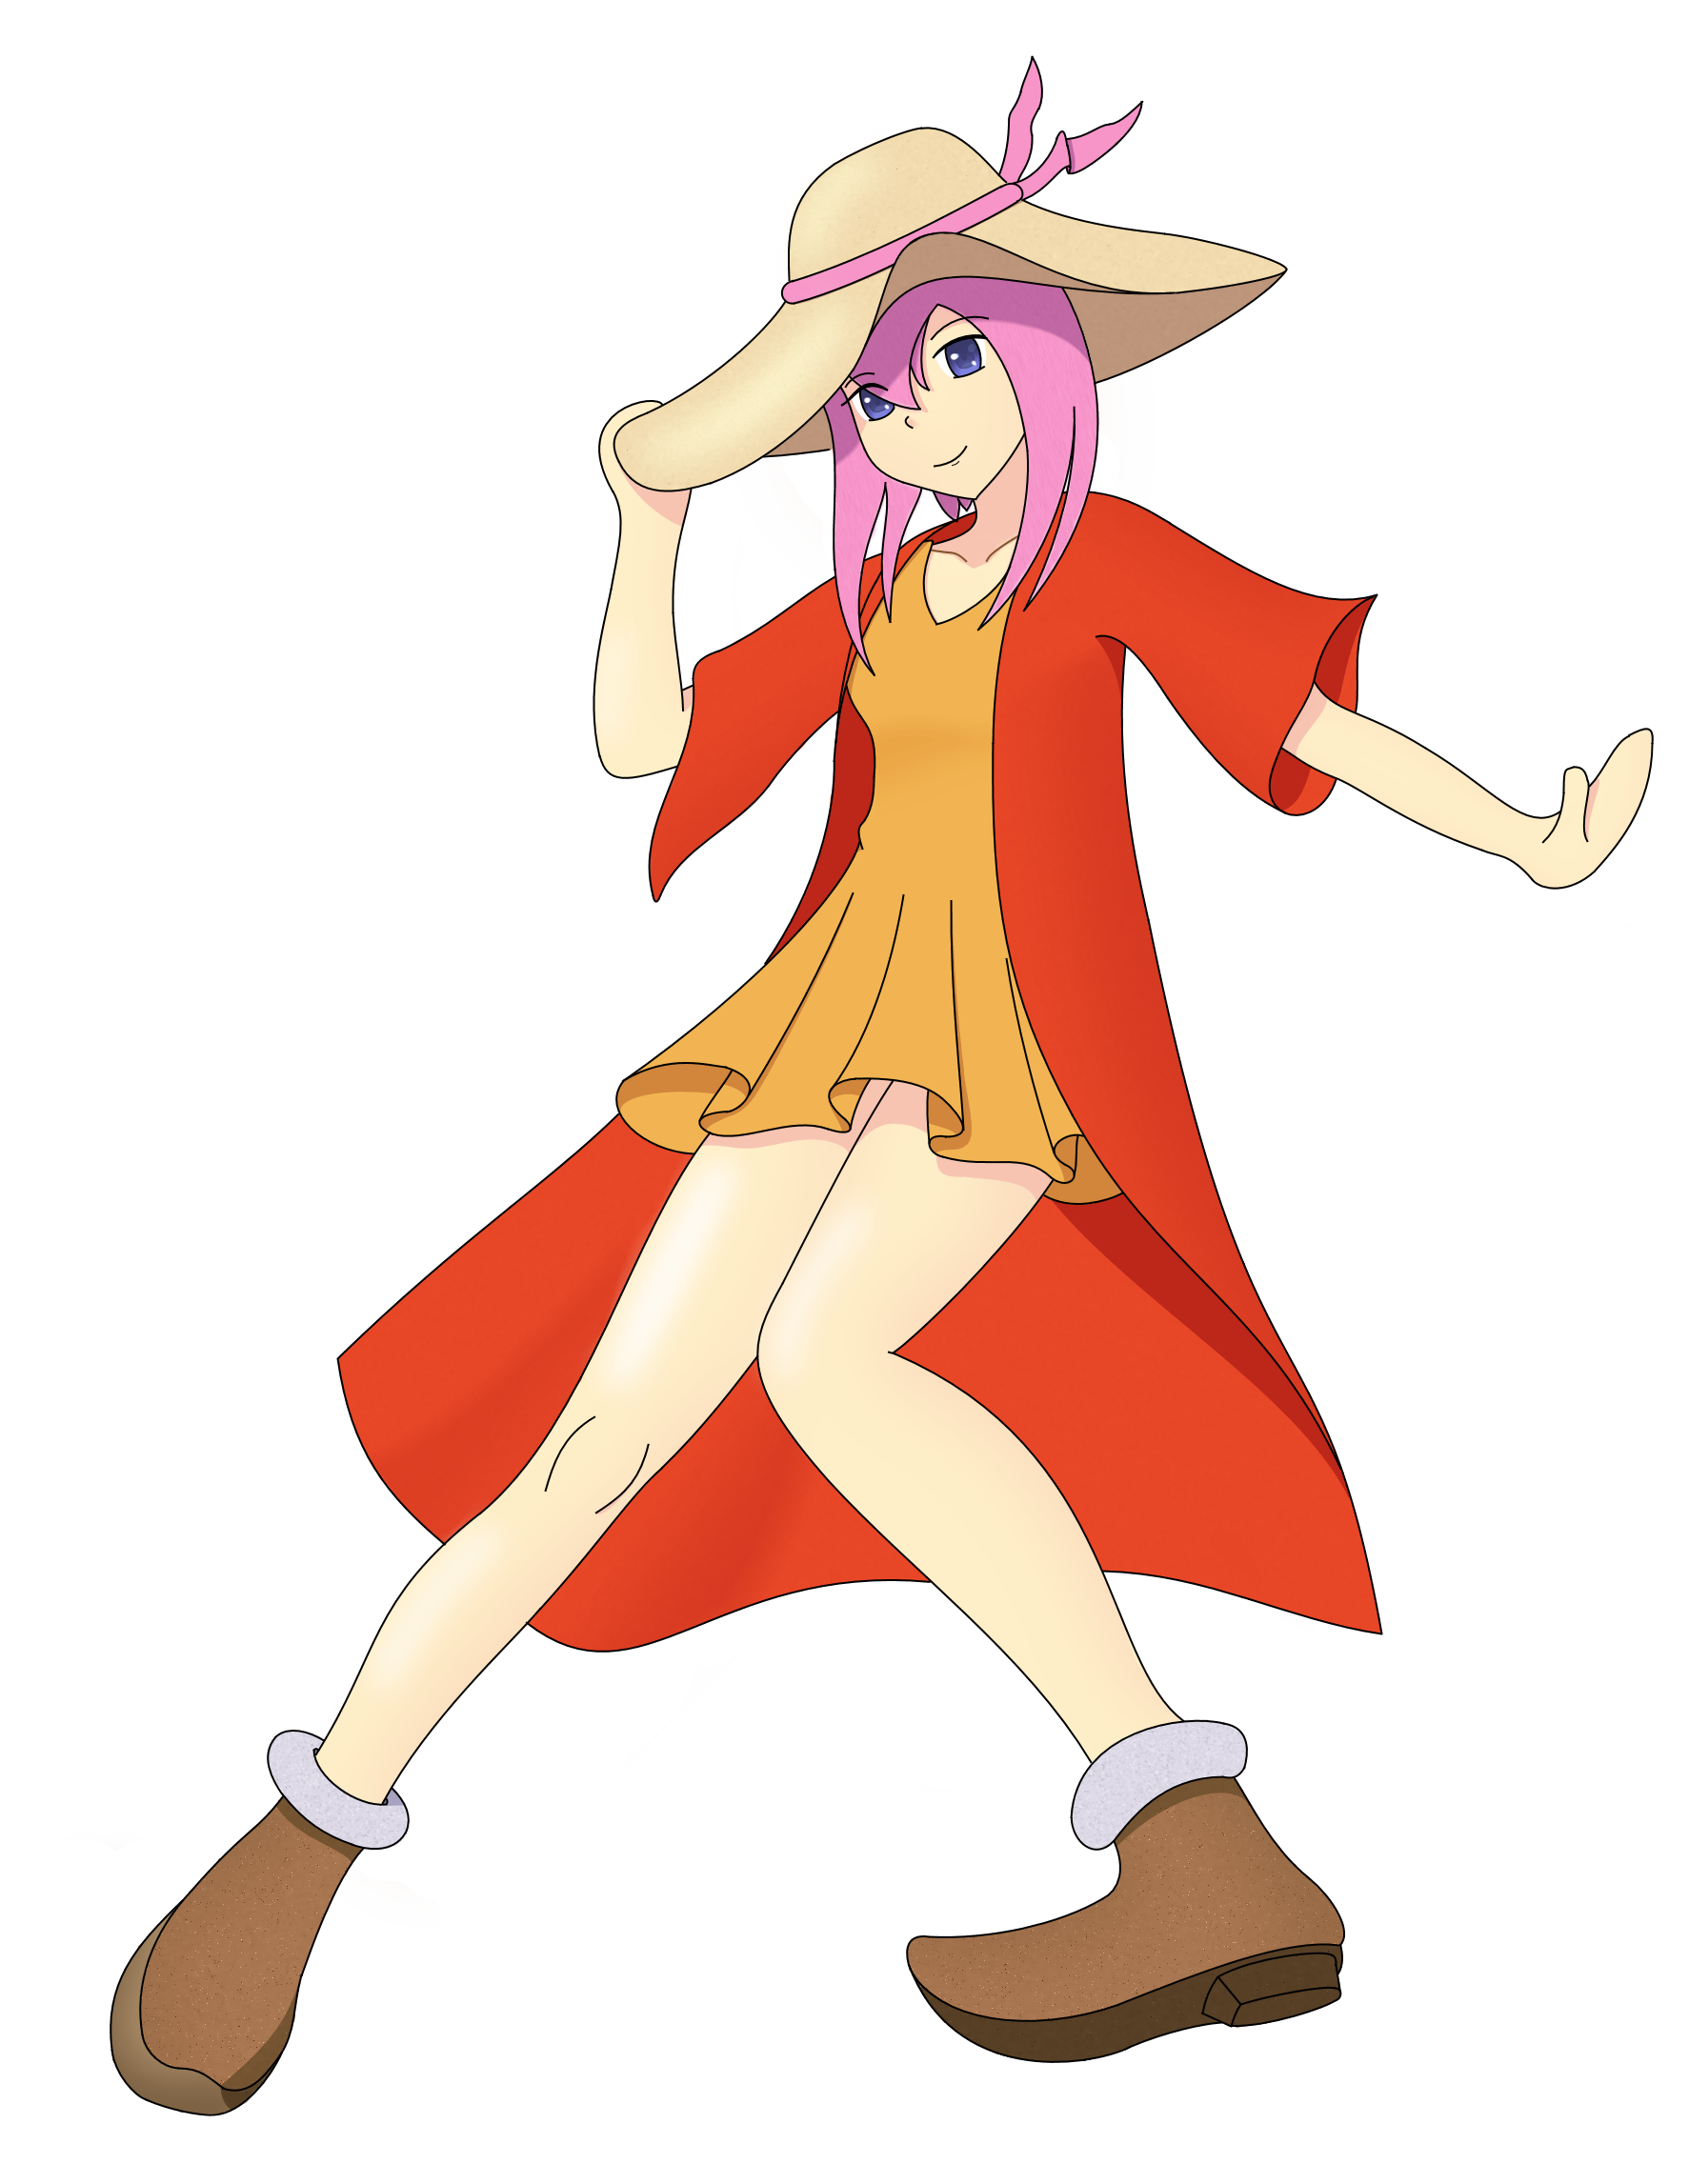 A girl with pink hair wearing a broad sun hat. She's got a yellow skirt and oversized red coat.